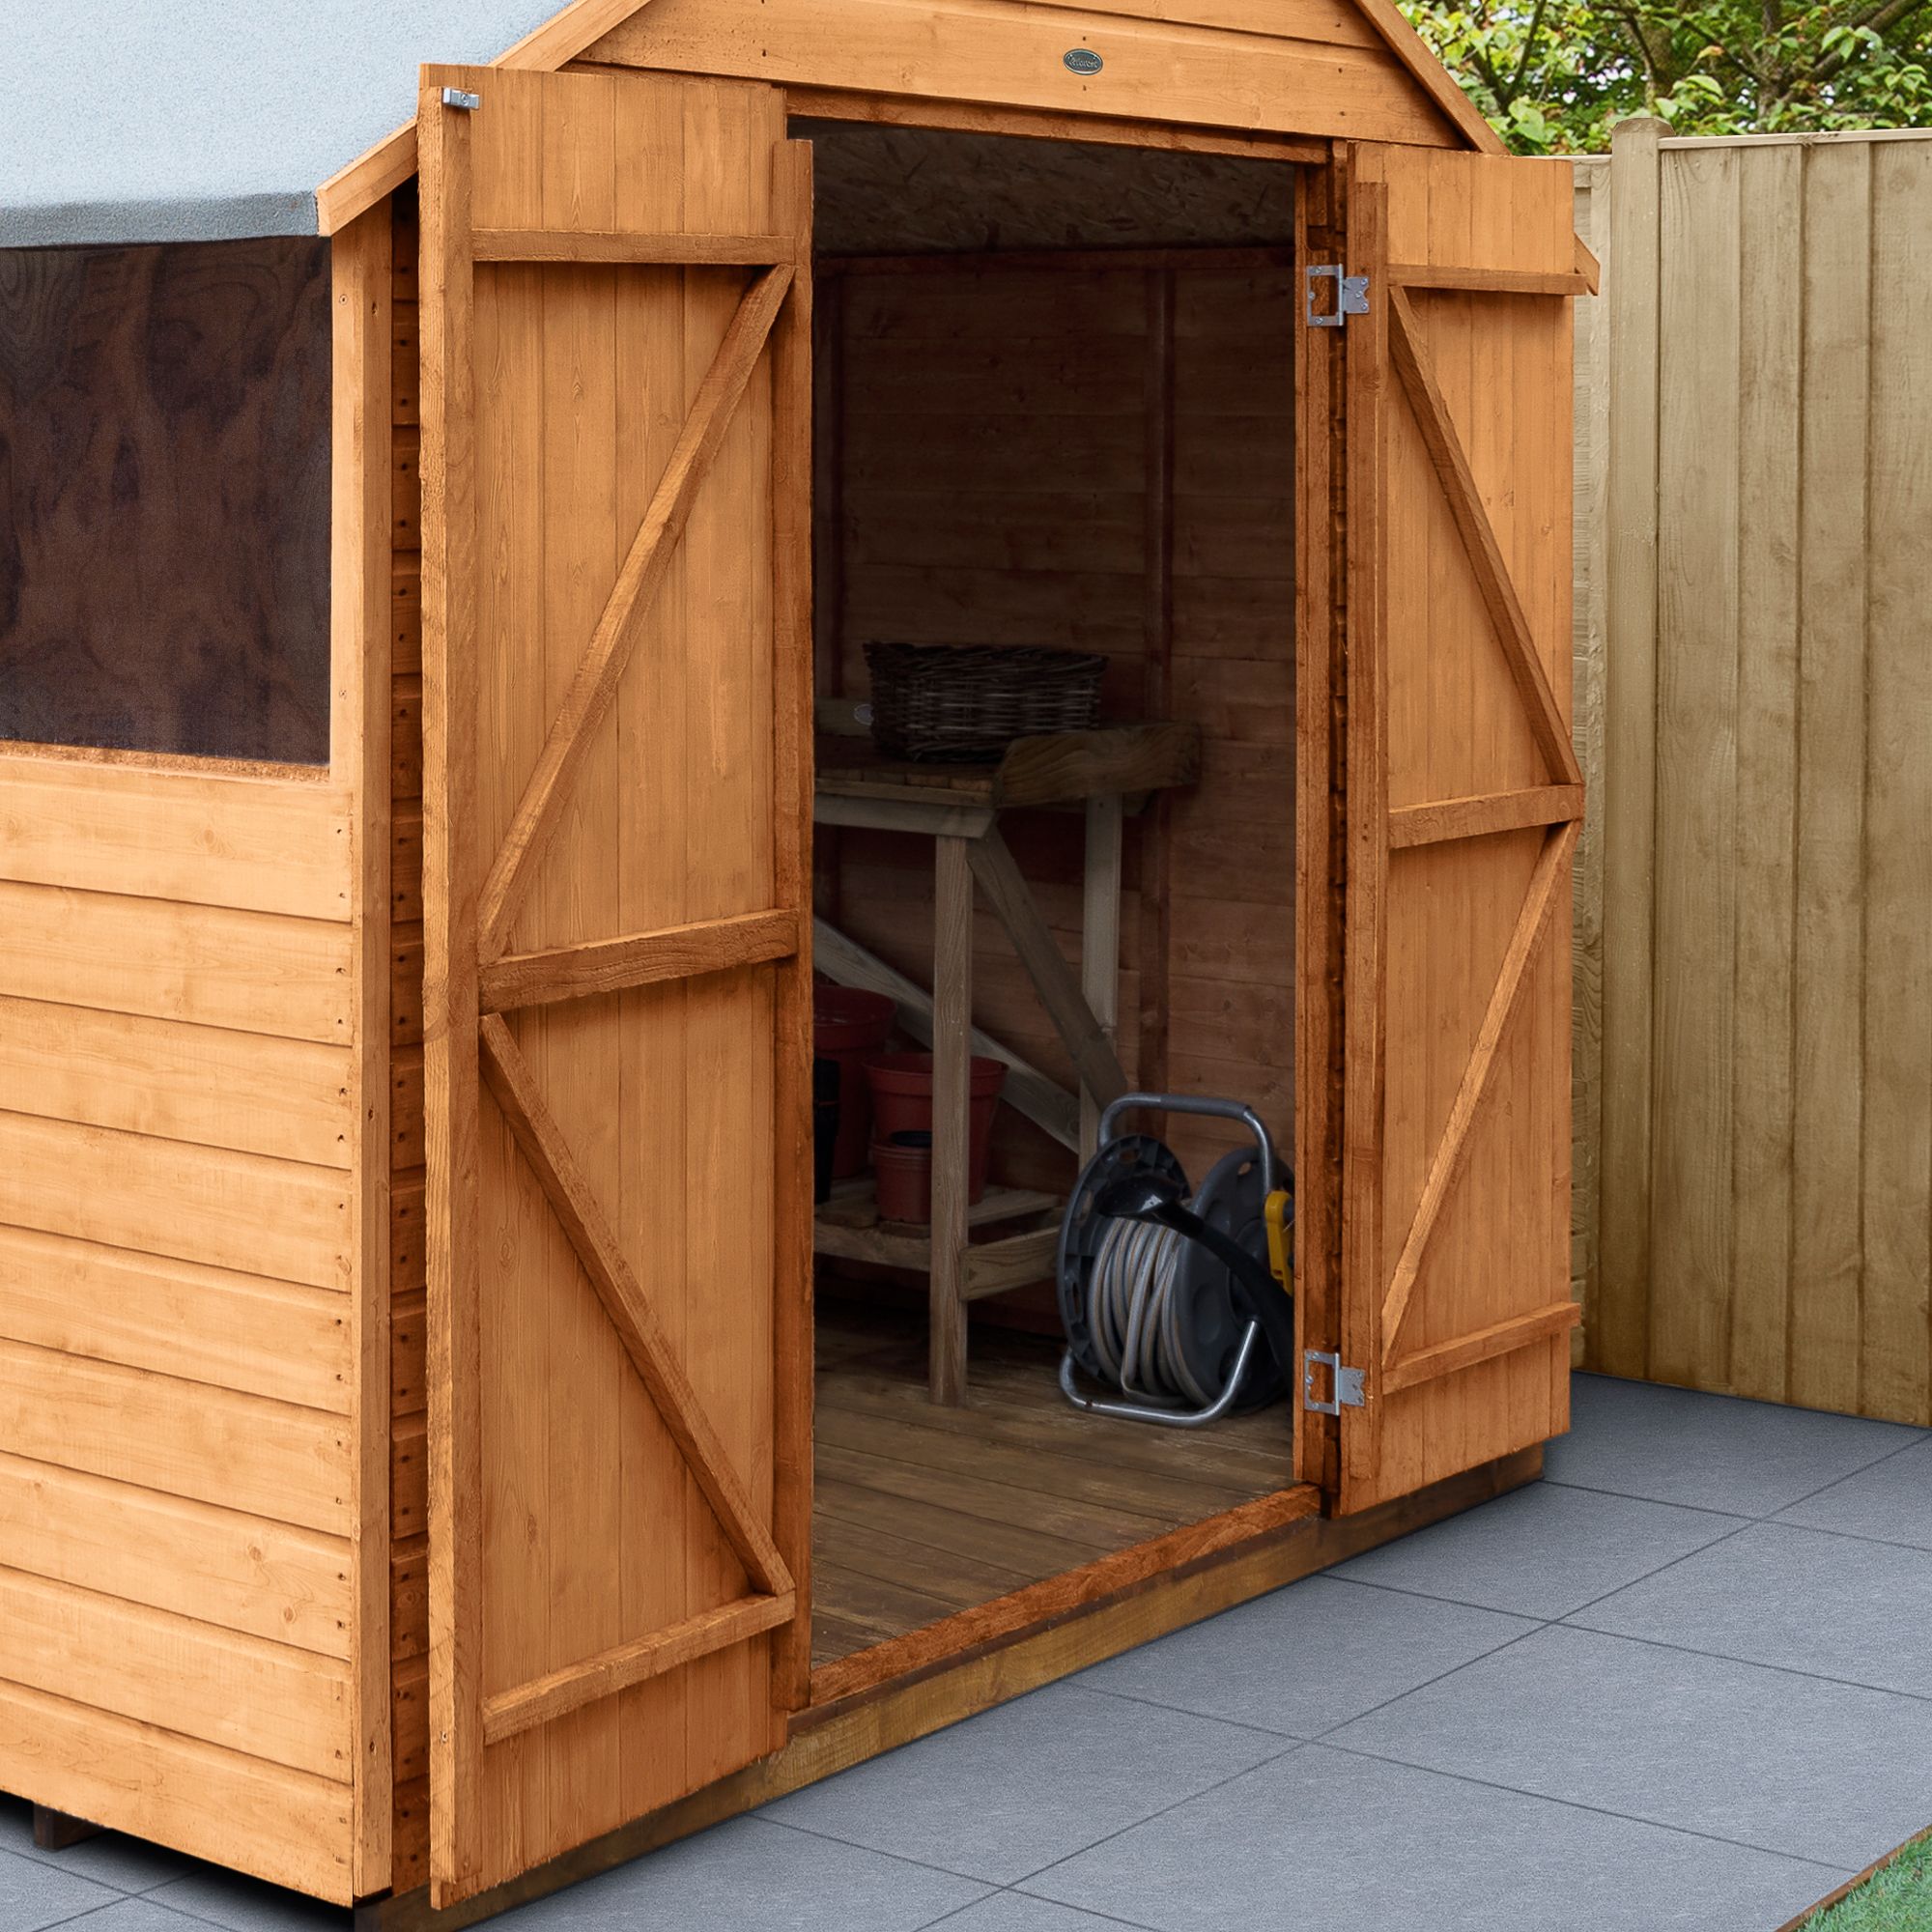 Forest Garden Shiplap 20x10 ft Apex Wooden 2 door Shed with floor - Assembly service included